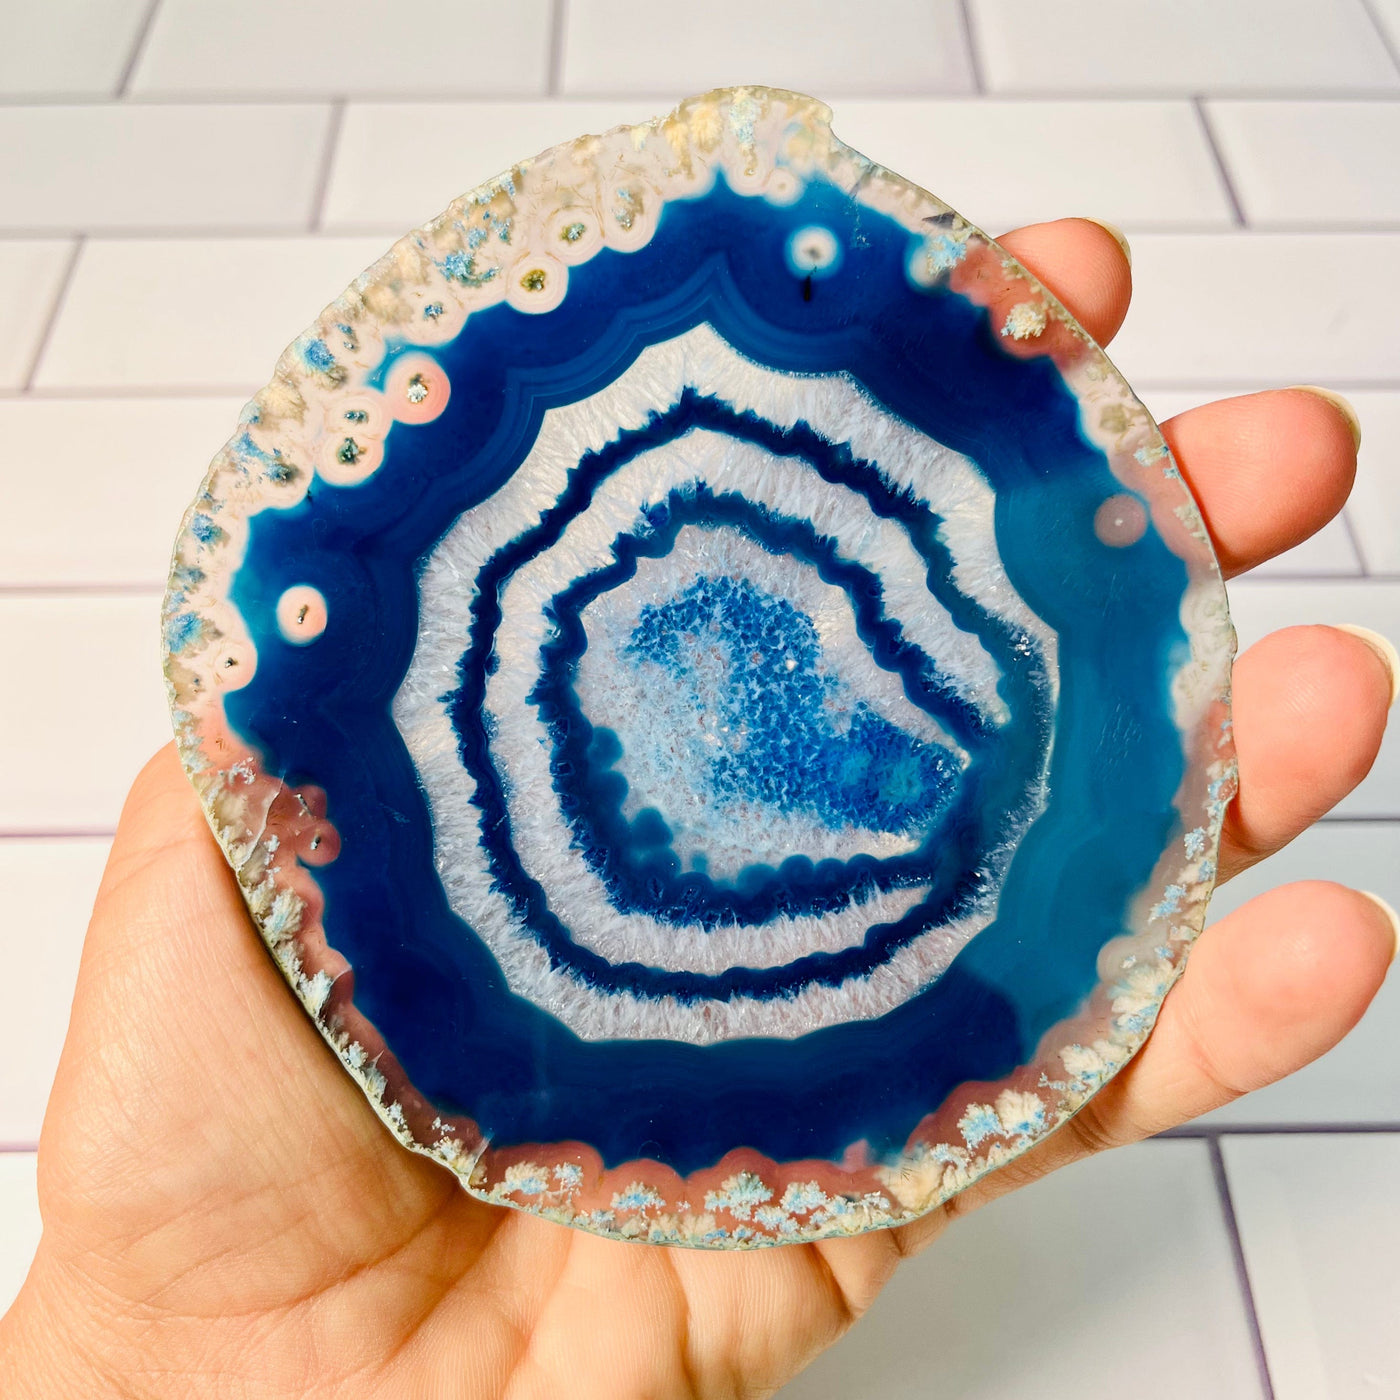 Back view of the mid sized Agate slice, blue white and clear in color, held in woman's hand.